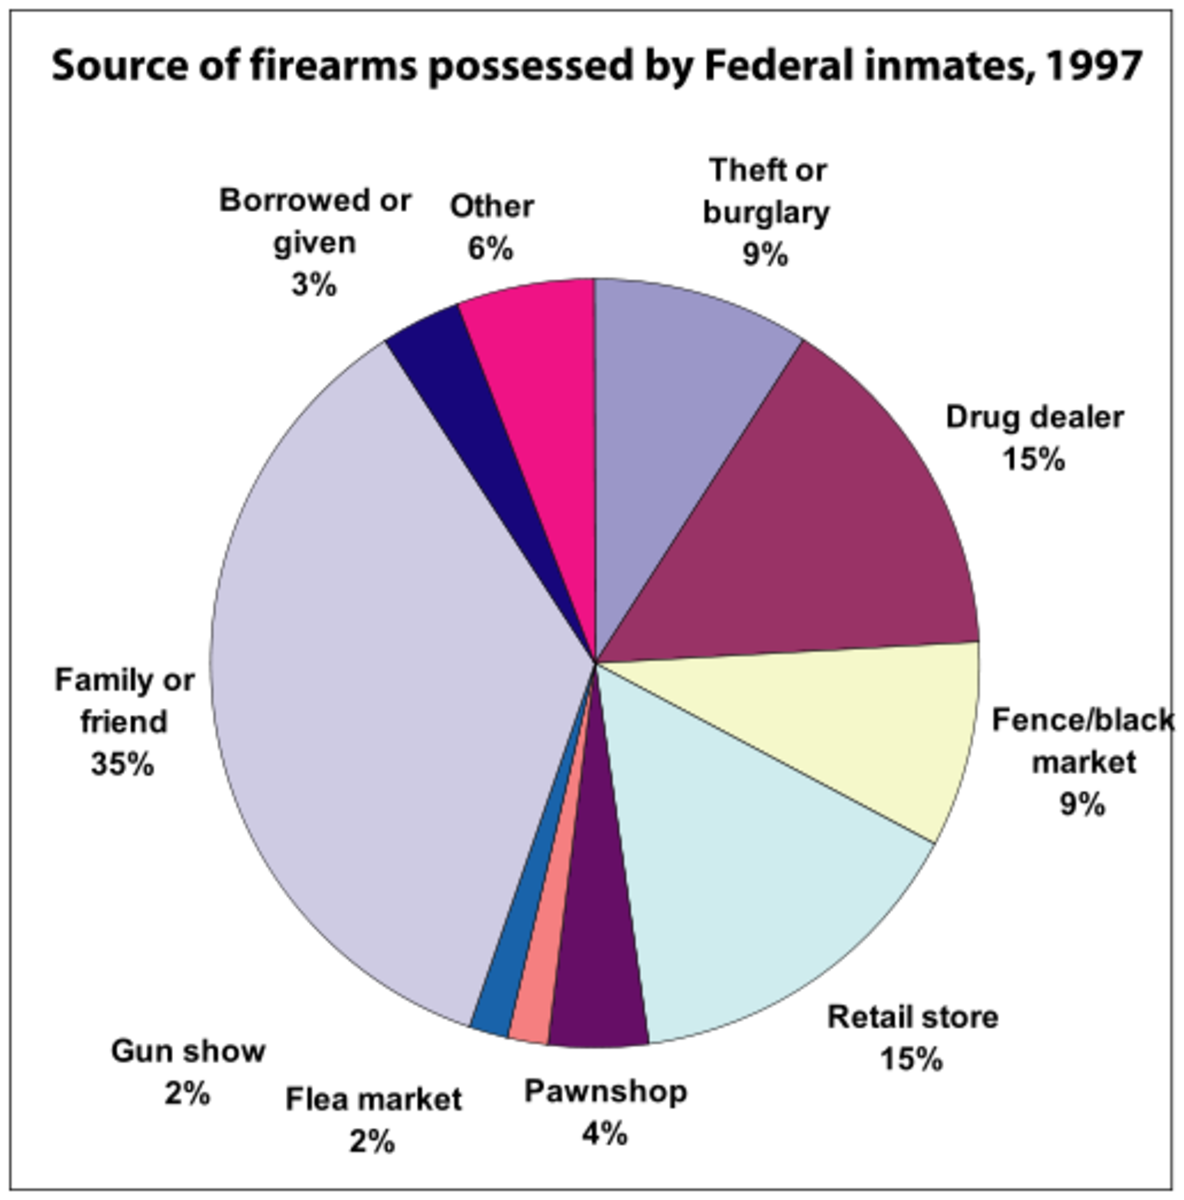 SOURCES OF GUNS OF FEDERAL INMATES-1997: CHART 1